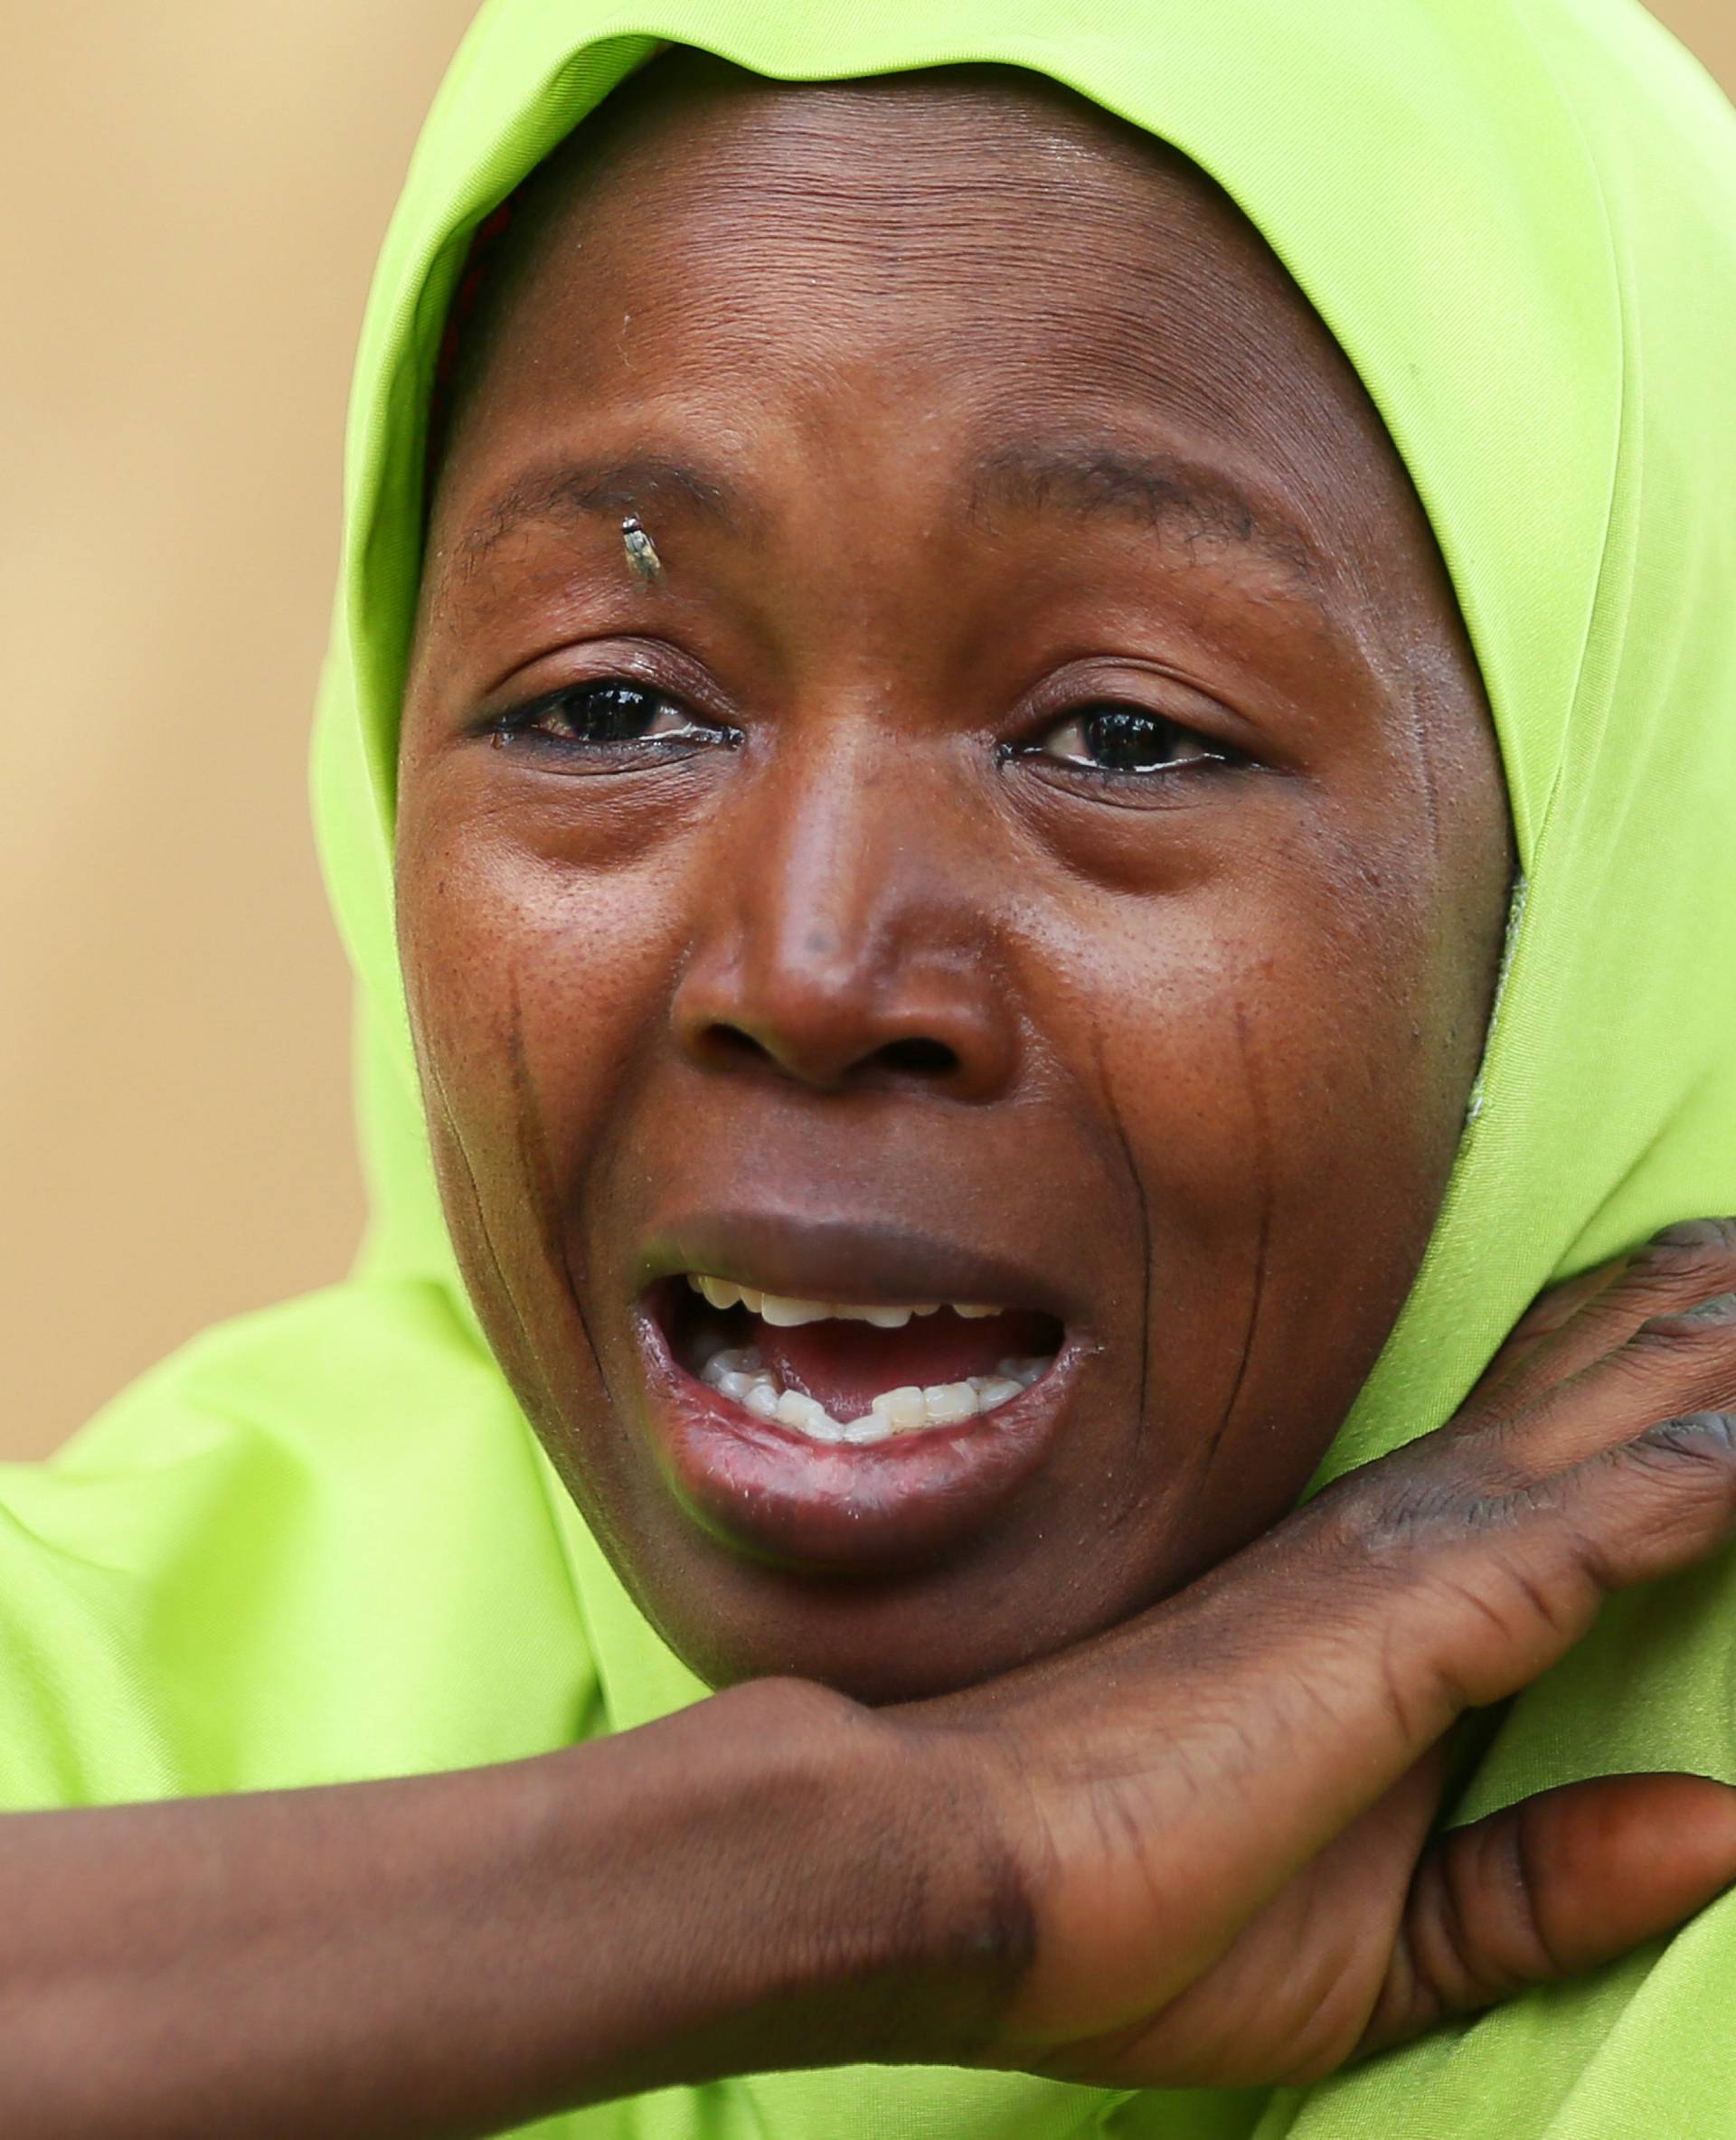 A relative of one of the missing school girls reacts in Dapchi in the northeastern state of Yobe